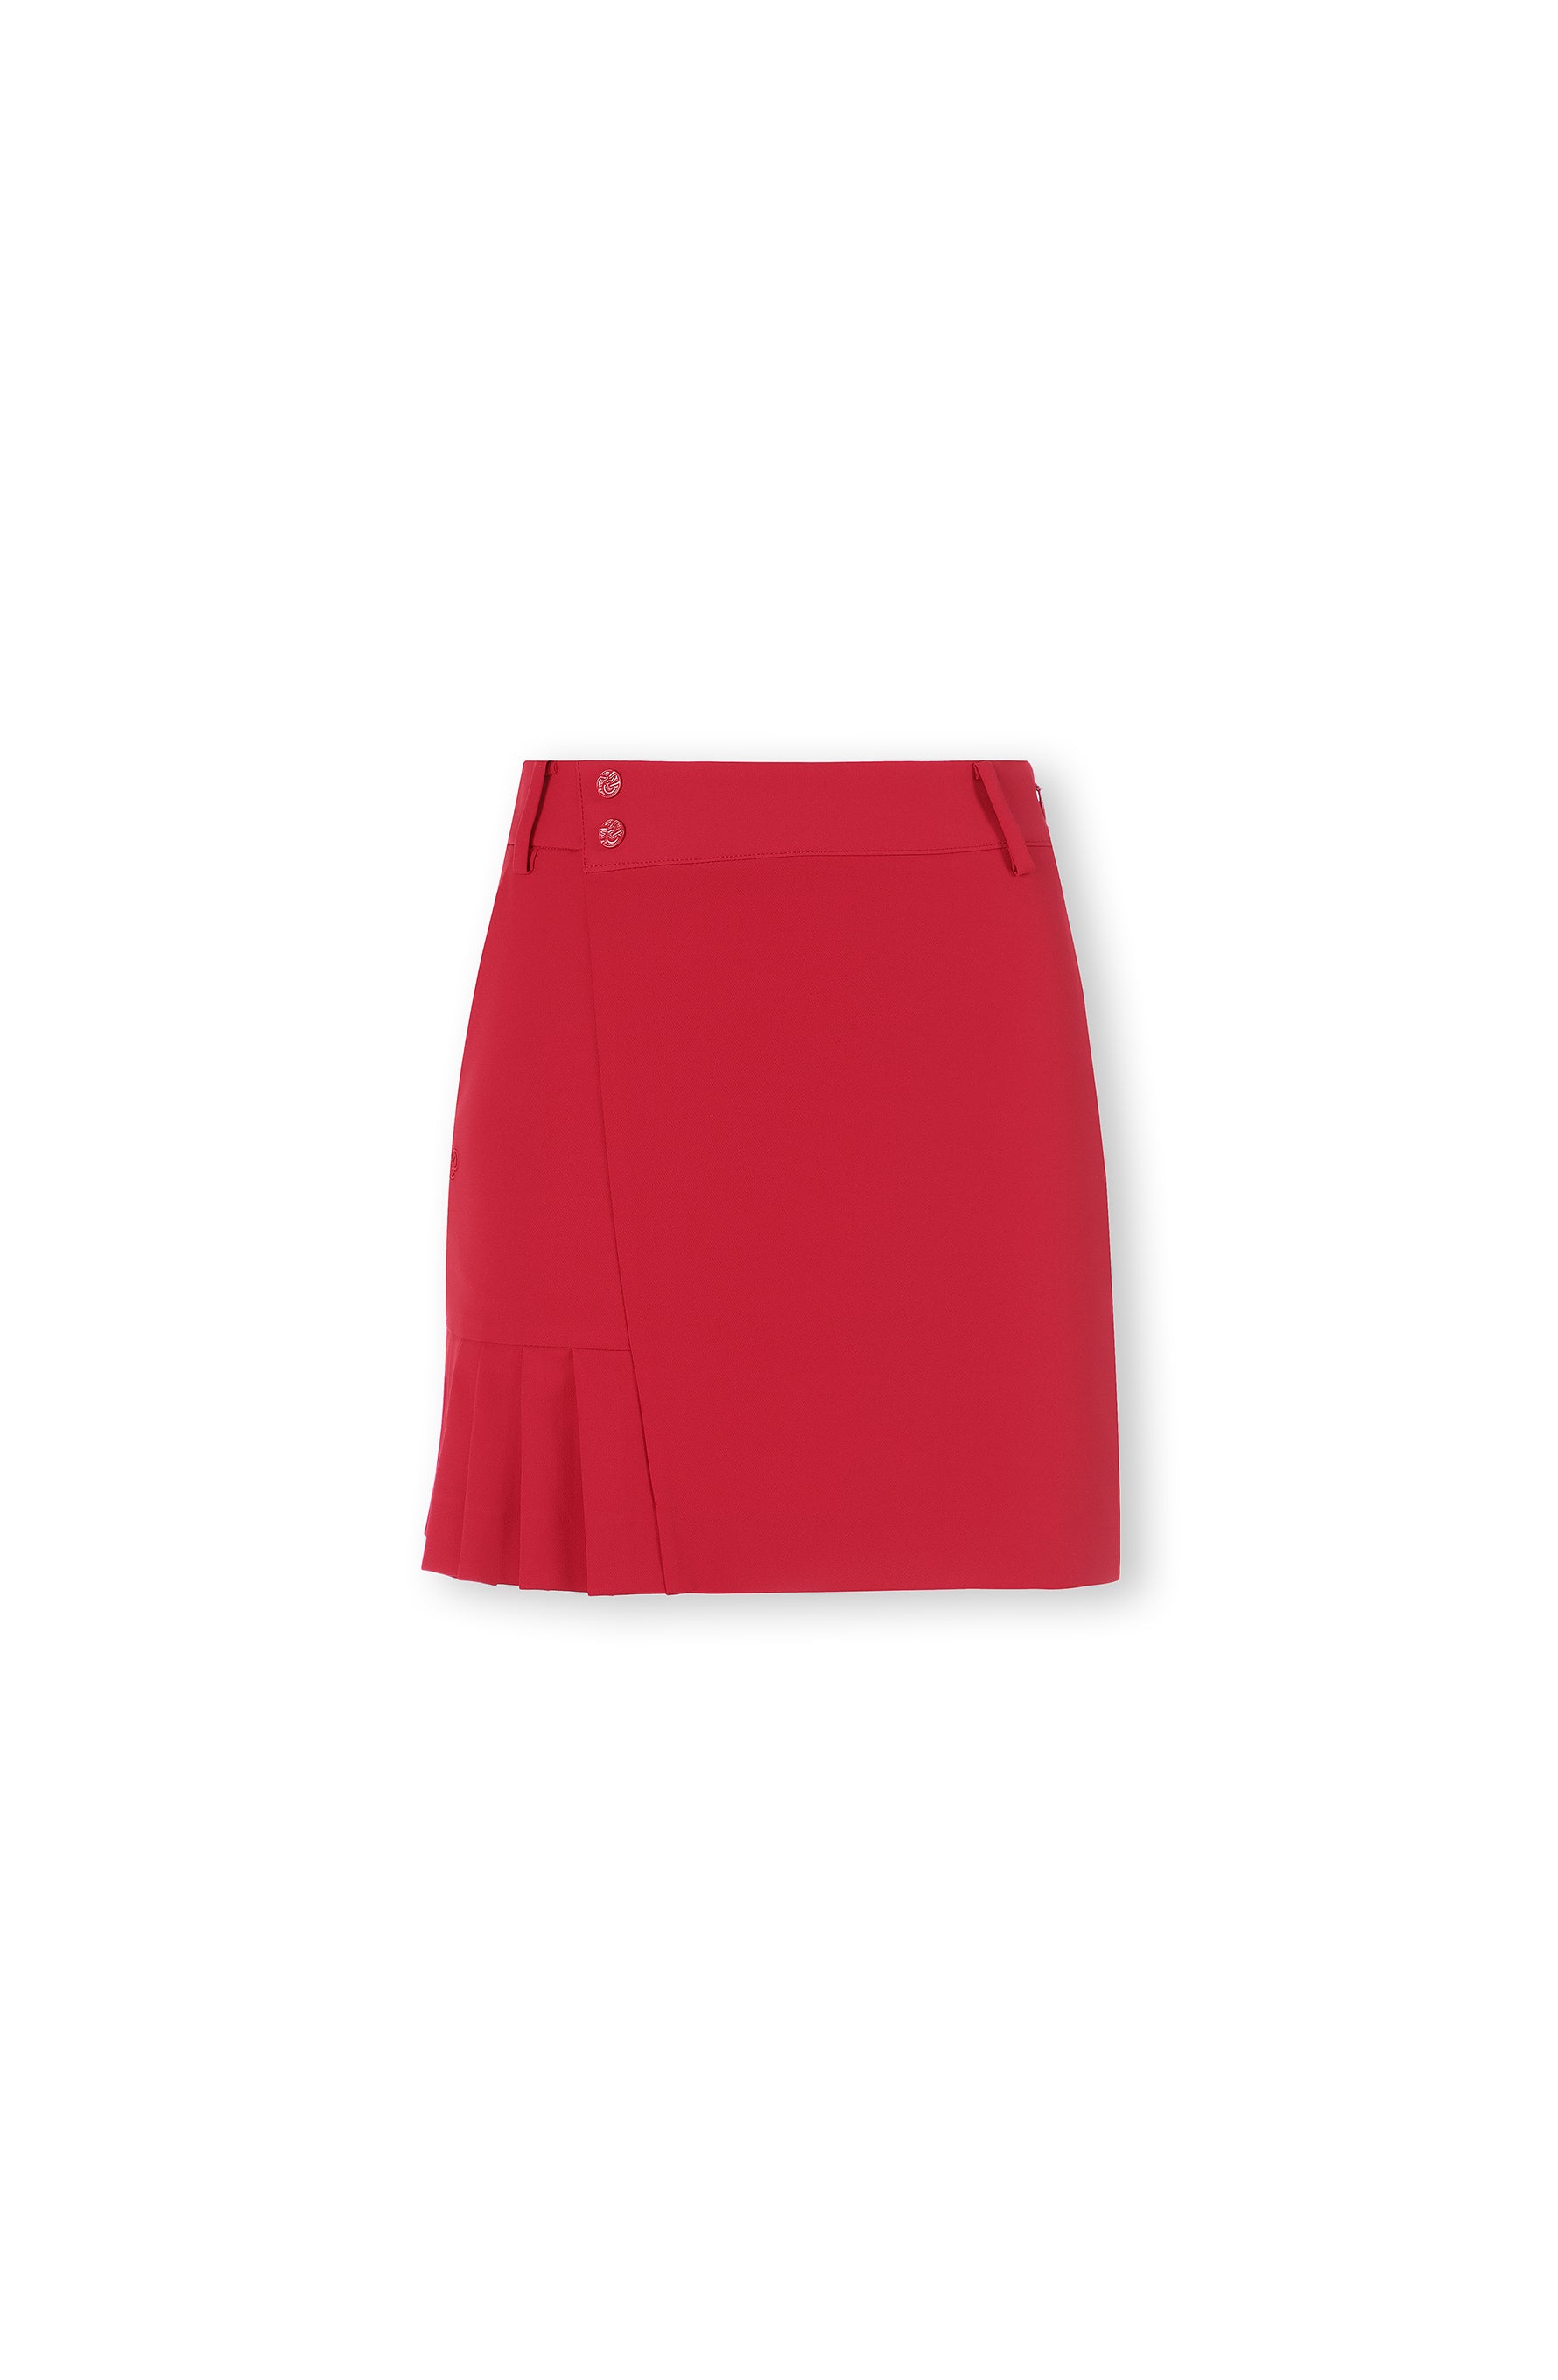 MCKAYSON FW22 WOMEN PLEATED CULOTTE HOT PINK